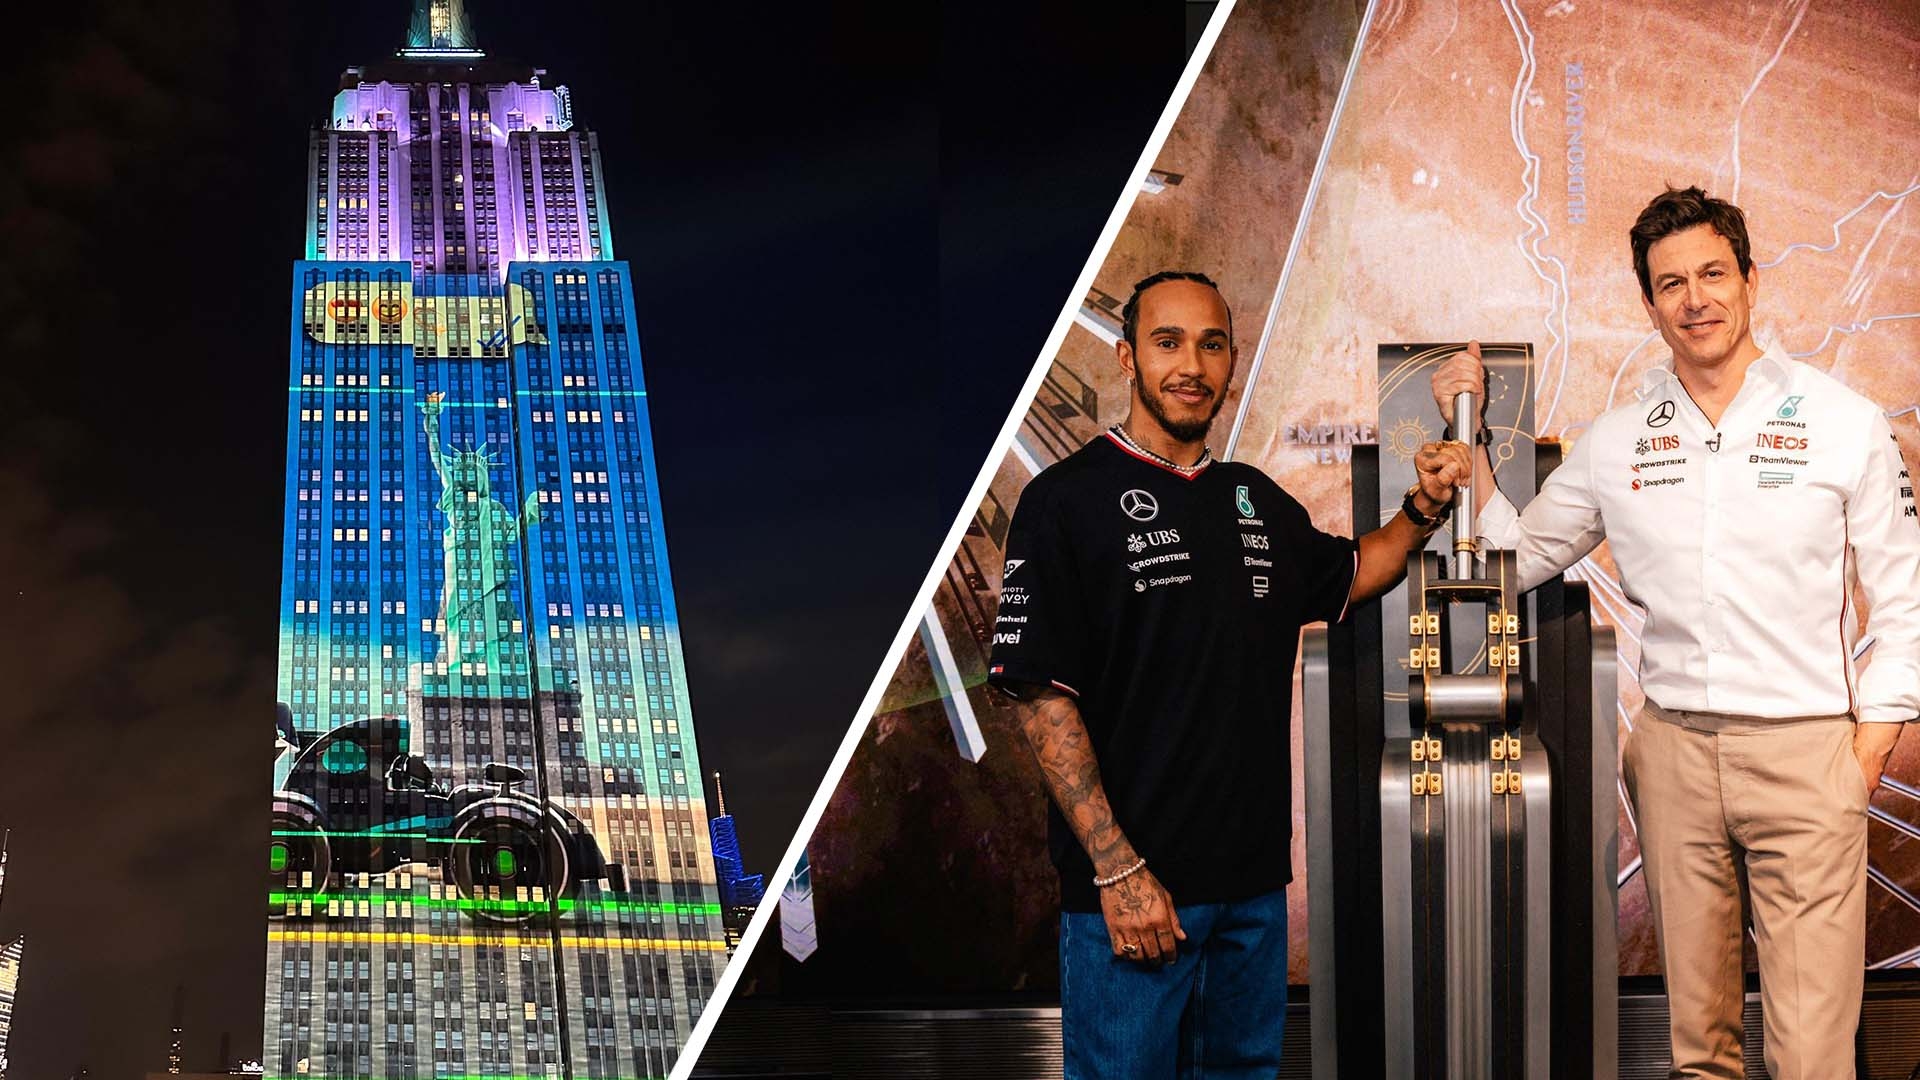 Mercedes light up the Empire State Building with emoji launch